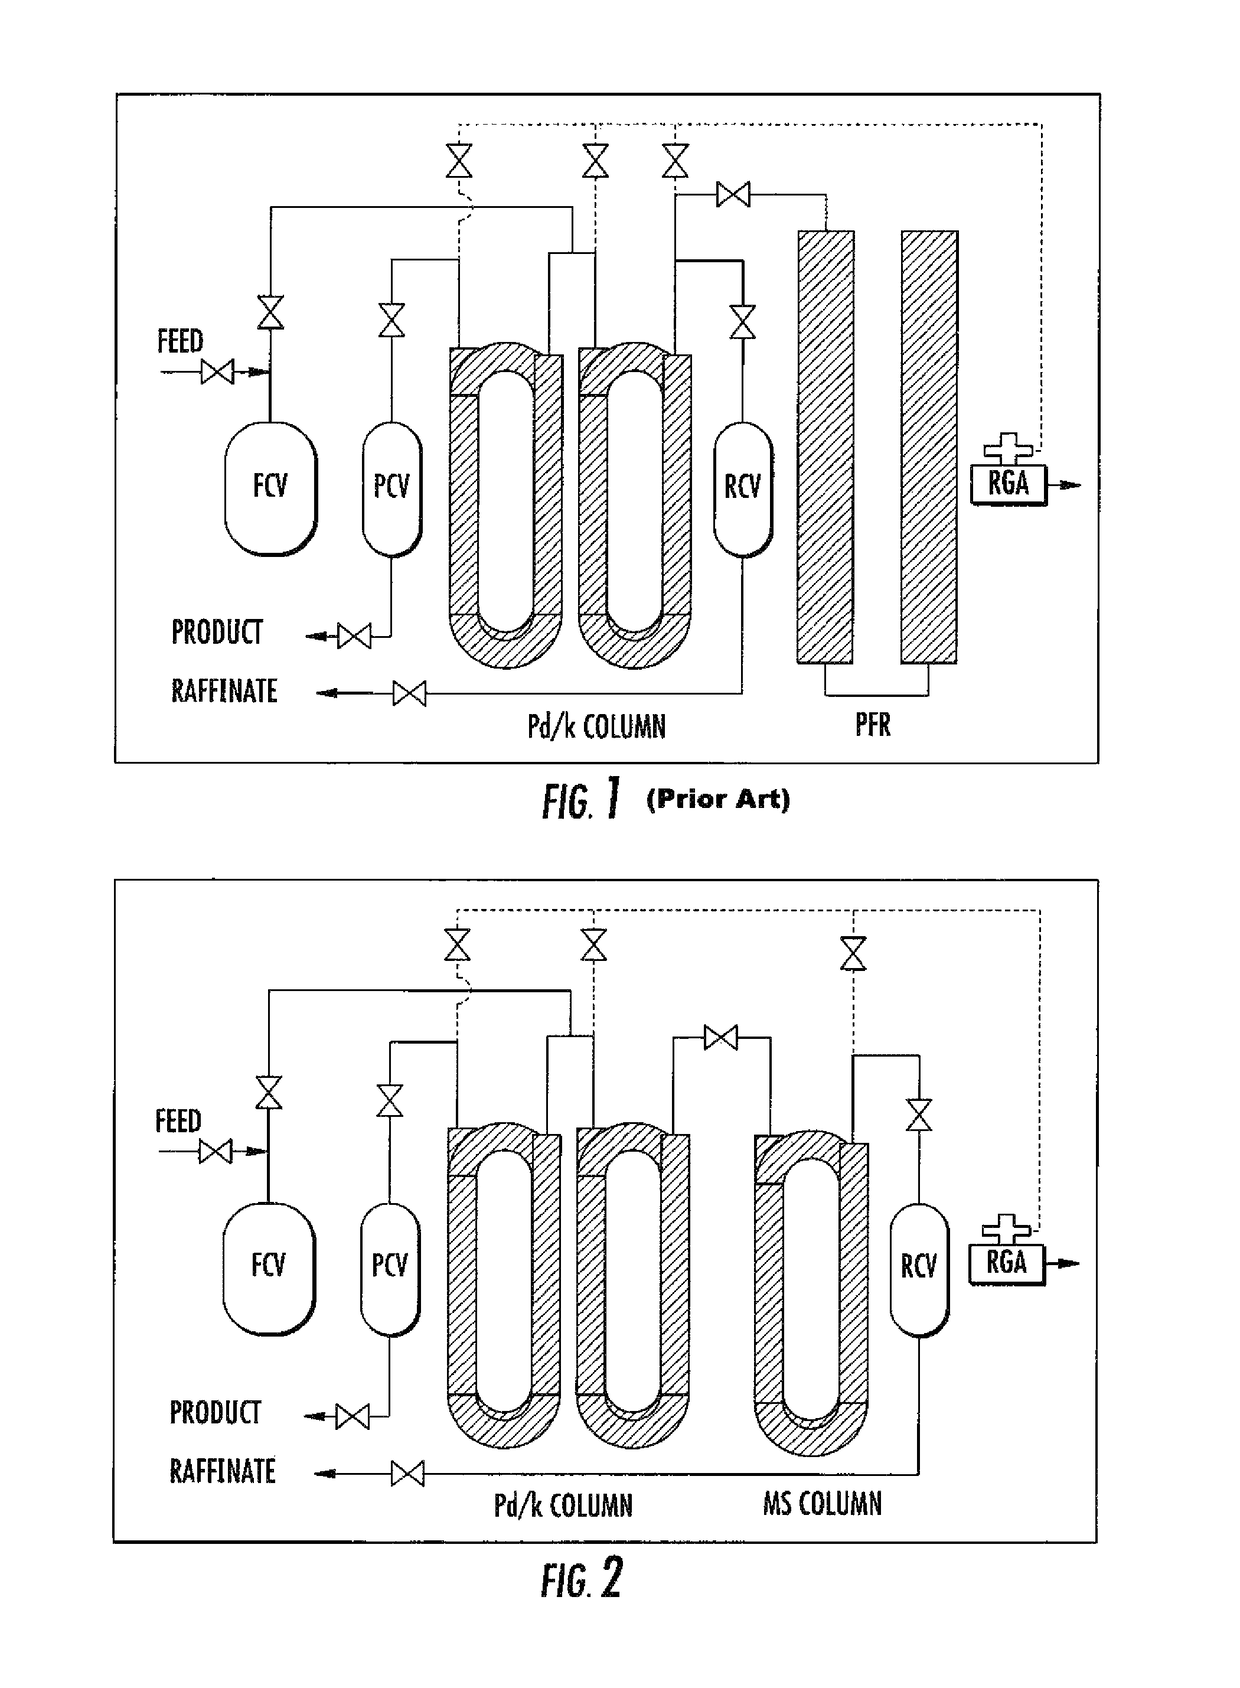 Apparatus and process for separating hydrogen isotopes